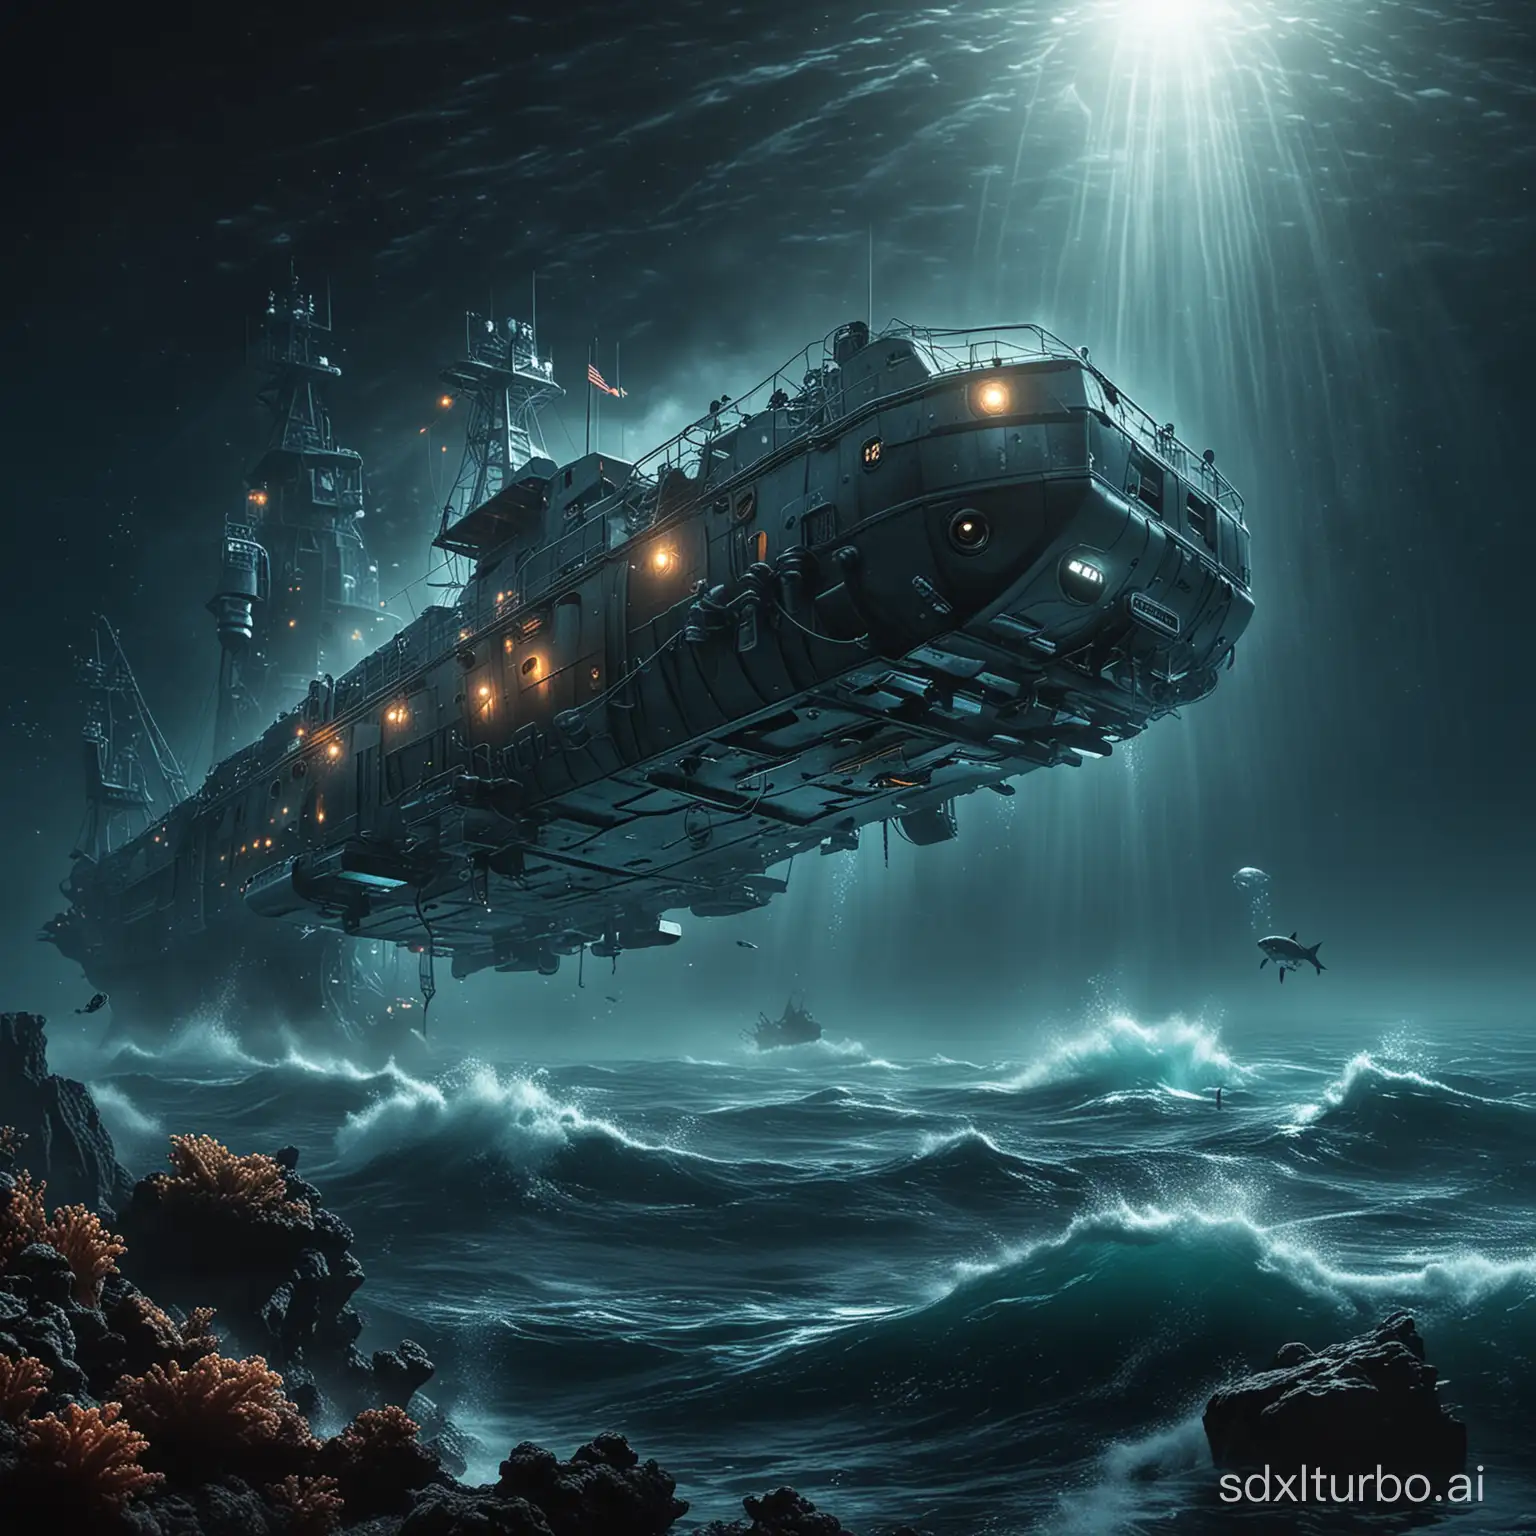 A promotional image for a science fiction deep sea exploration